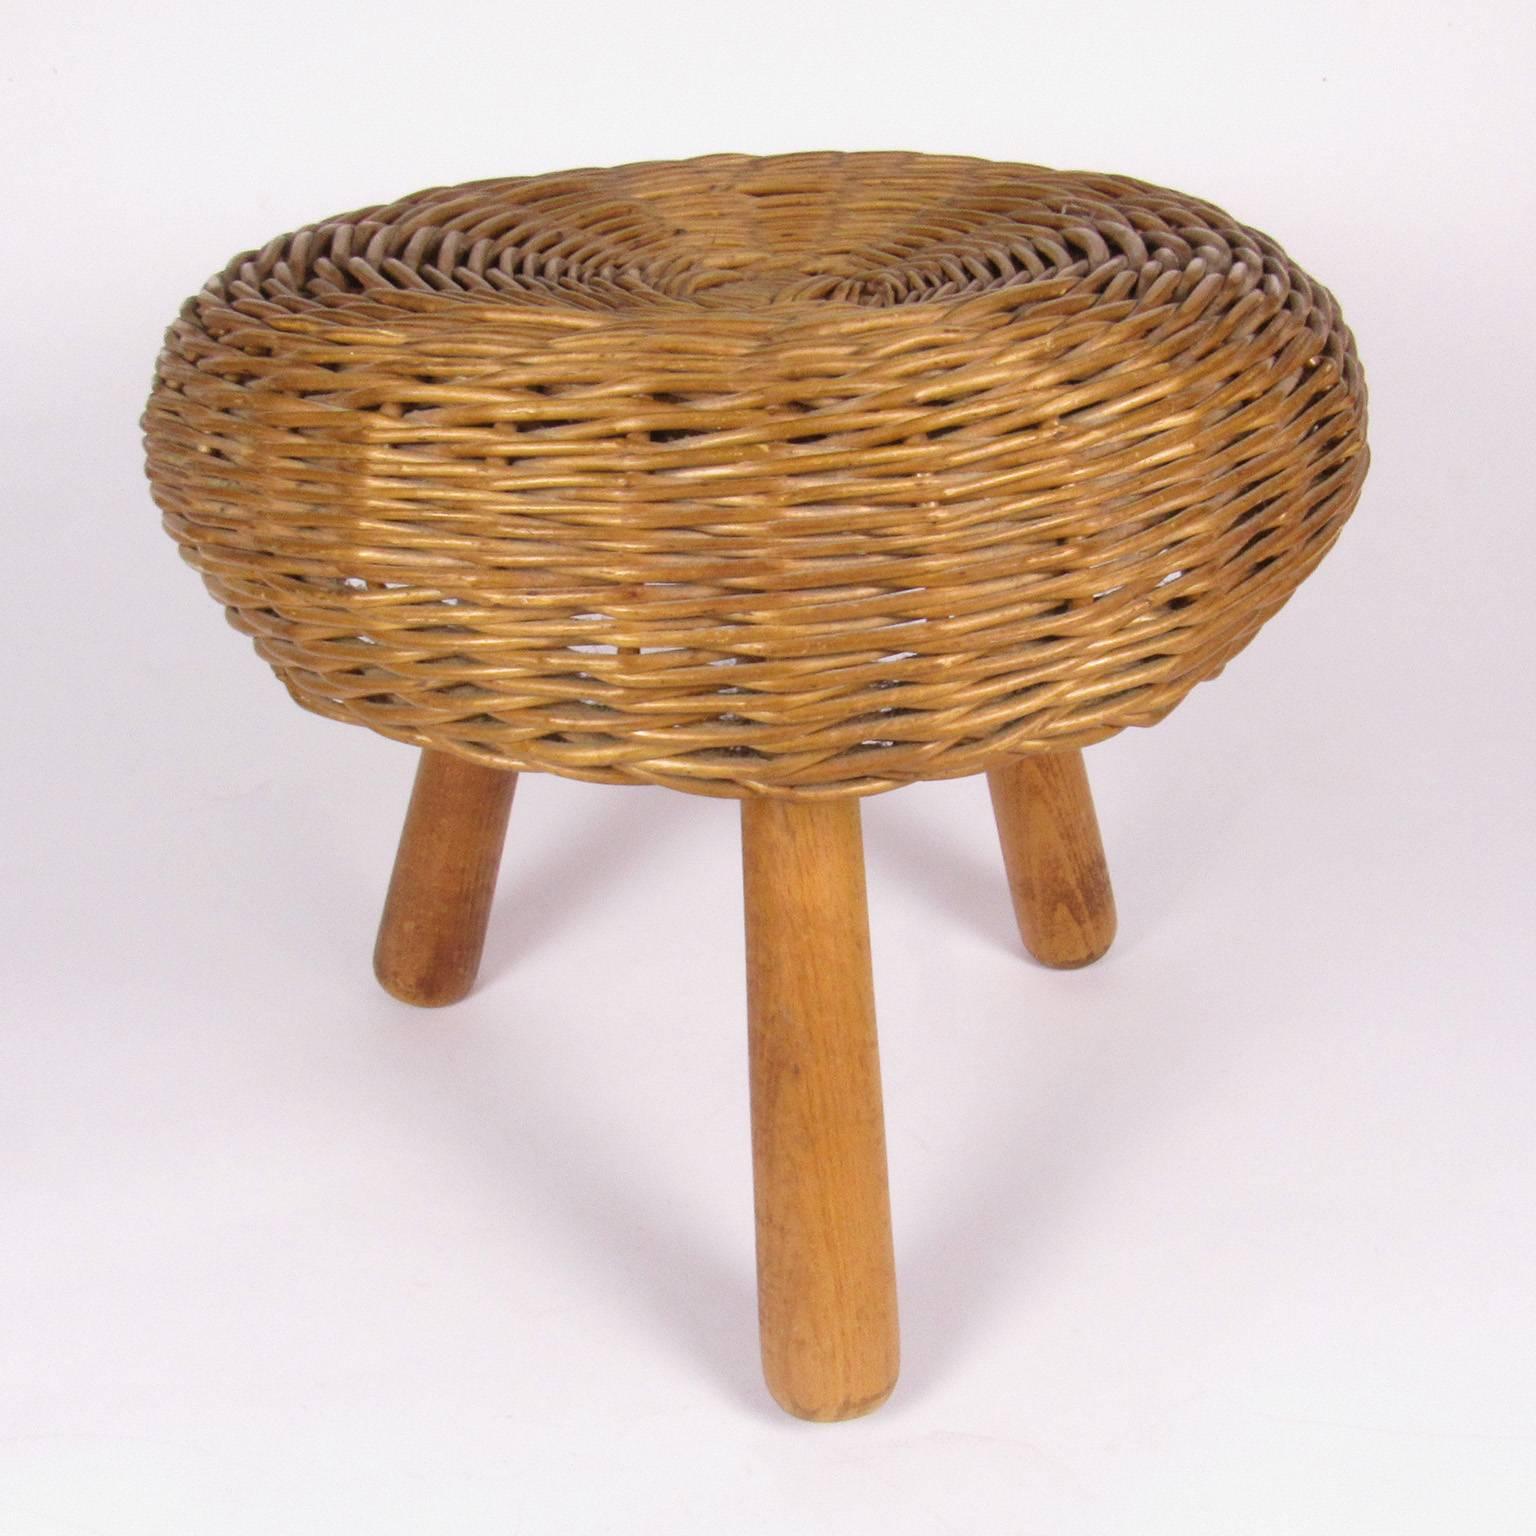 Tony Paul Mid-Century Modern wicker tripod stool, circa 1950/ round wicker top supported by tripod legs. Measures: Height 12 inches, diameter 12 1/2 inches.